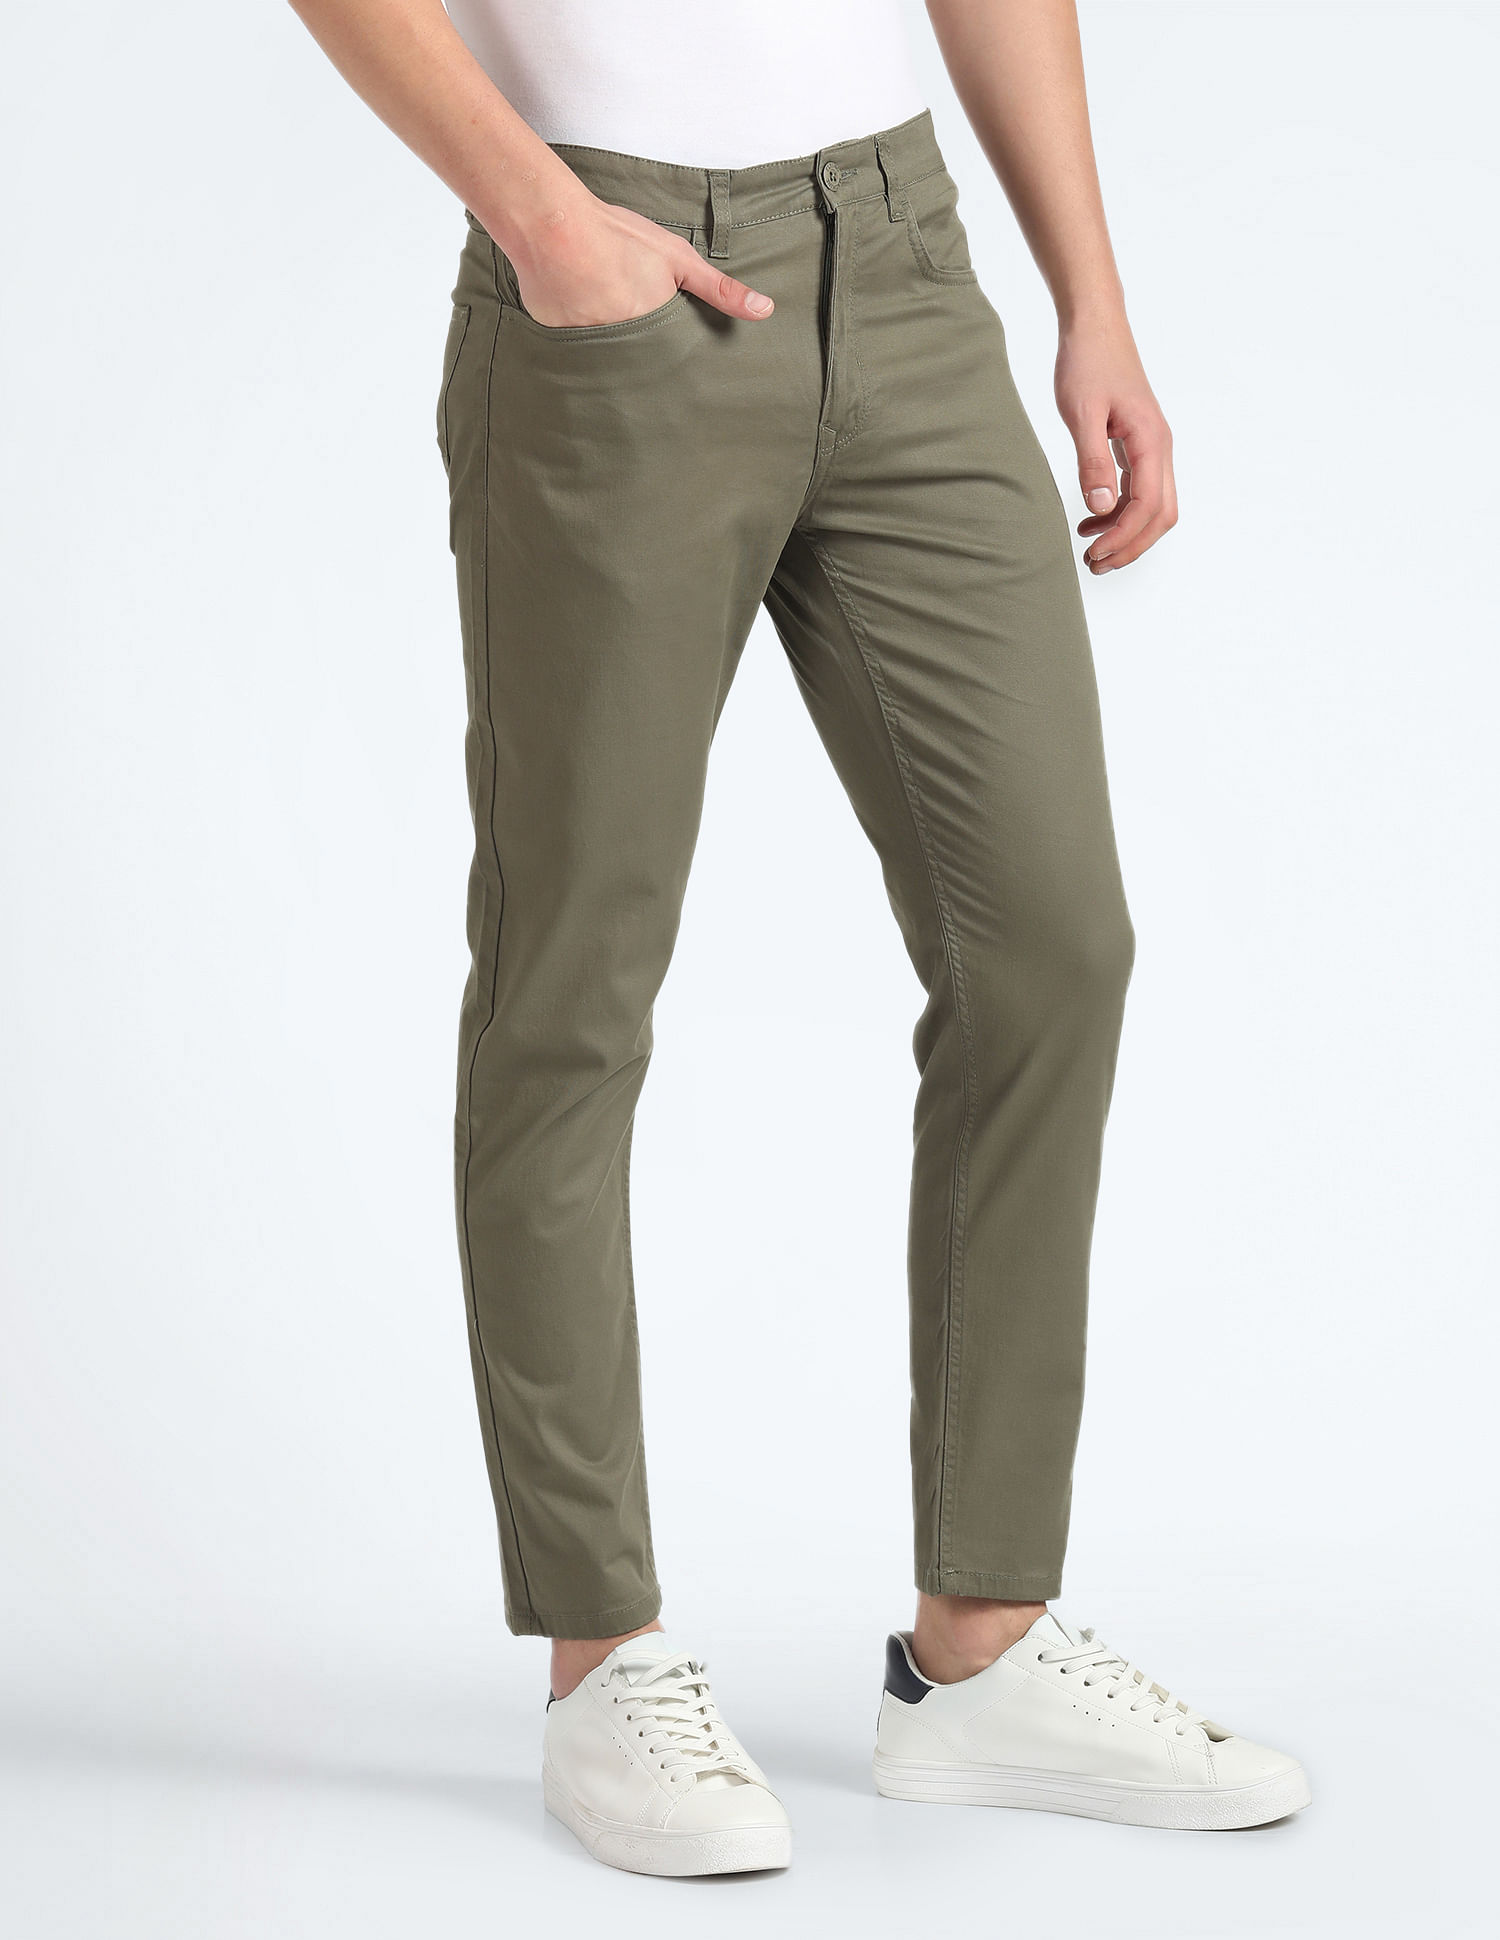 Solid Trousers - Buy Solid Trousers online in India